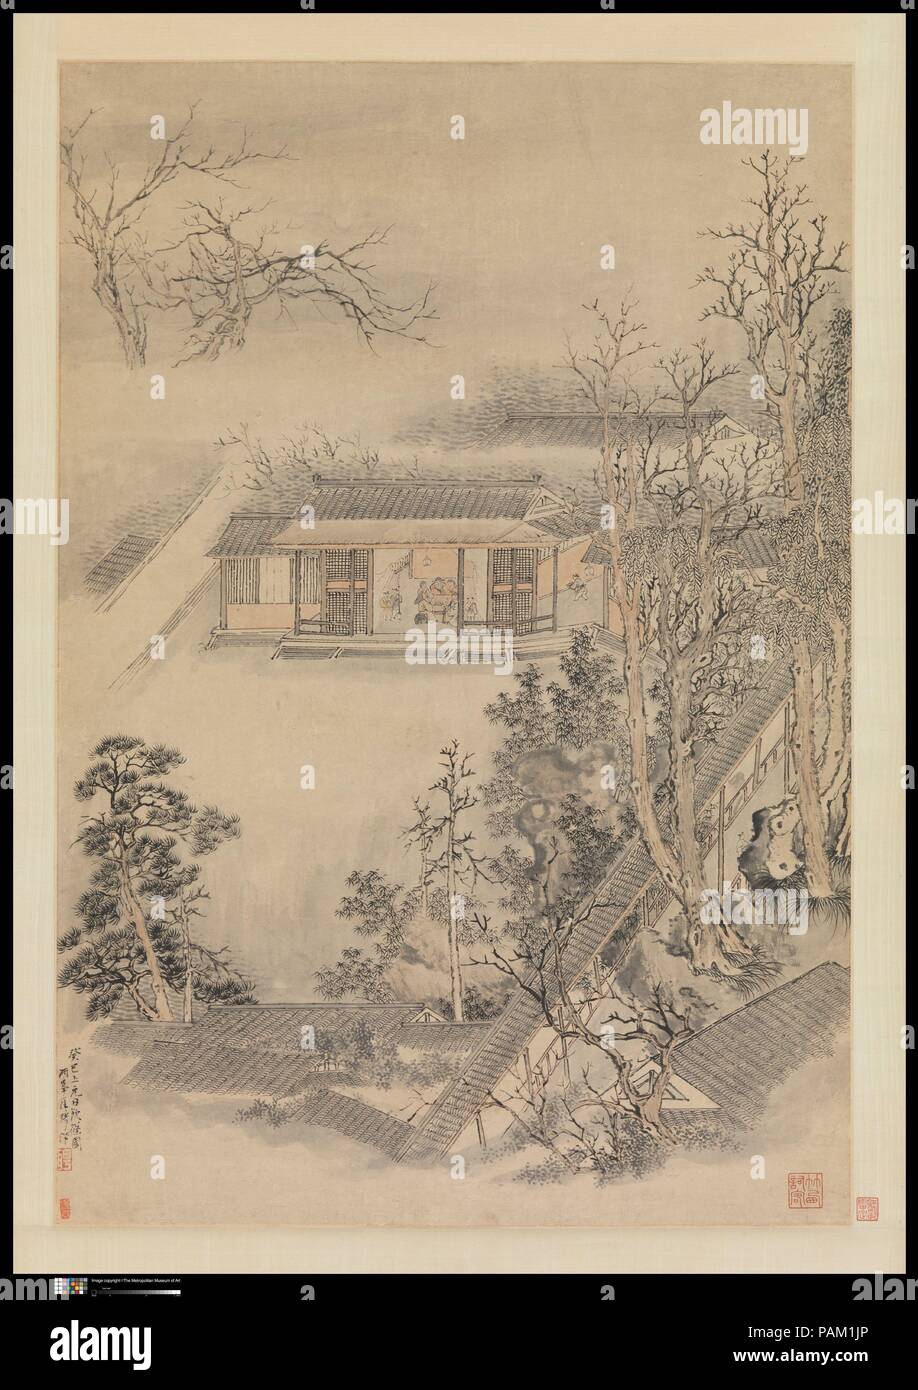 Drinking in the Bamboo Garden. Artist: Luo Ping (Chinese, 1733-1799). Culture: China. Dimensions: Image: 31 1/2 x 21 1/2 in. (80 x 54.6 cm)  Overall with mounting: 116 x 27 7/16 in. (294.6 x 69.7 cm)  Overall with knobs: 116 x 32 5/8 in. (294.6 x 82.9 cm). Date: dated 1773.  Painted at the end of Luo Ping's first Beijing sojourn, this depiction of a gathering beneath a lantern to celebrate the first full moon of the year commemorates a moment of social interaction between the artist and his patron-friends. The 'Bamboo Garden' mentioned in Luo's inscription may refer to the famous Yangzhou prop Stock Photo